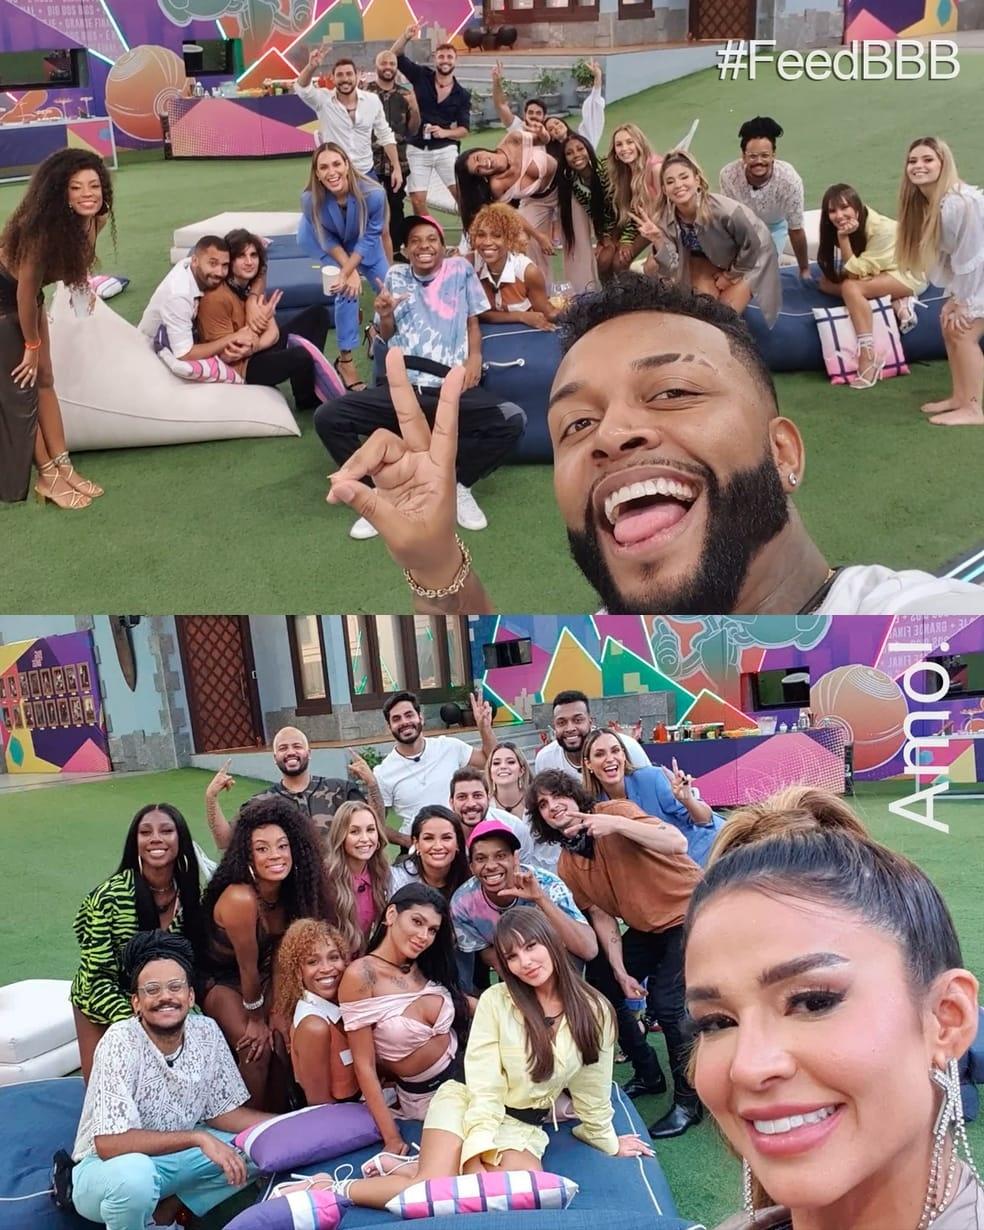 The brothers make a group selfie in "BBB 101 Day" - clone / Instagram